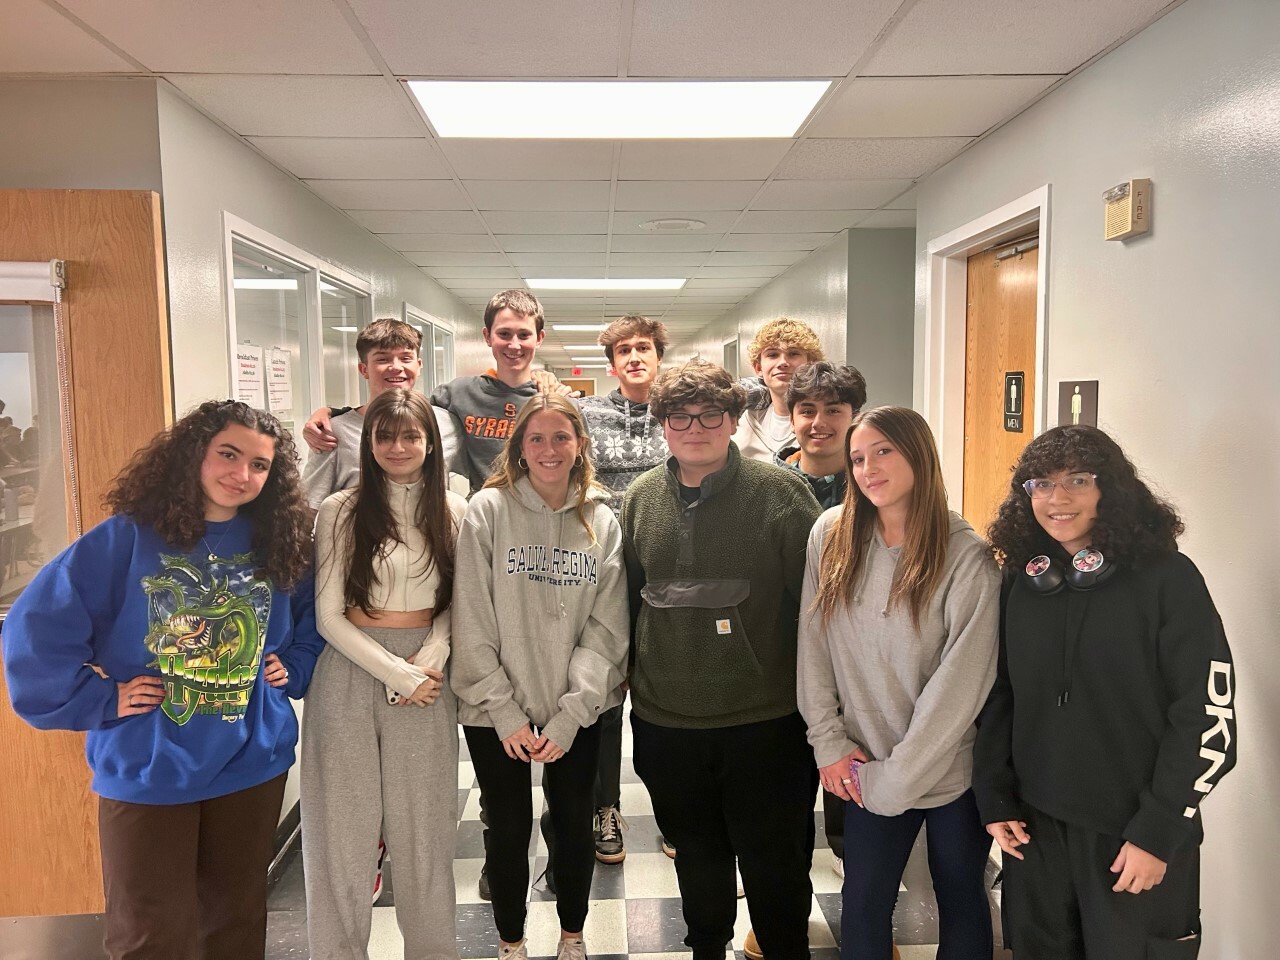 Sag Harbor’s Pierson High School students completed Finn’s Mission and raised more than $4,000 for the American Heart Association. COURTESY SAG HARBOR SCHOOL DISTRICT